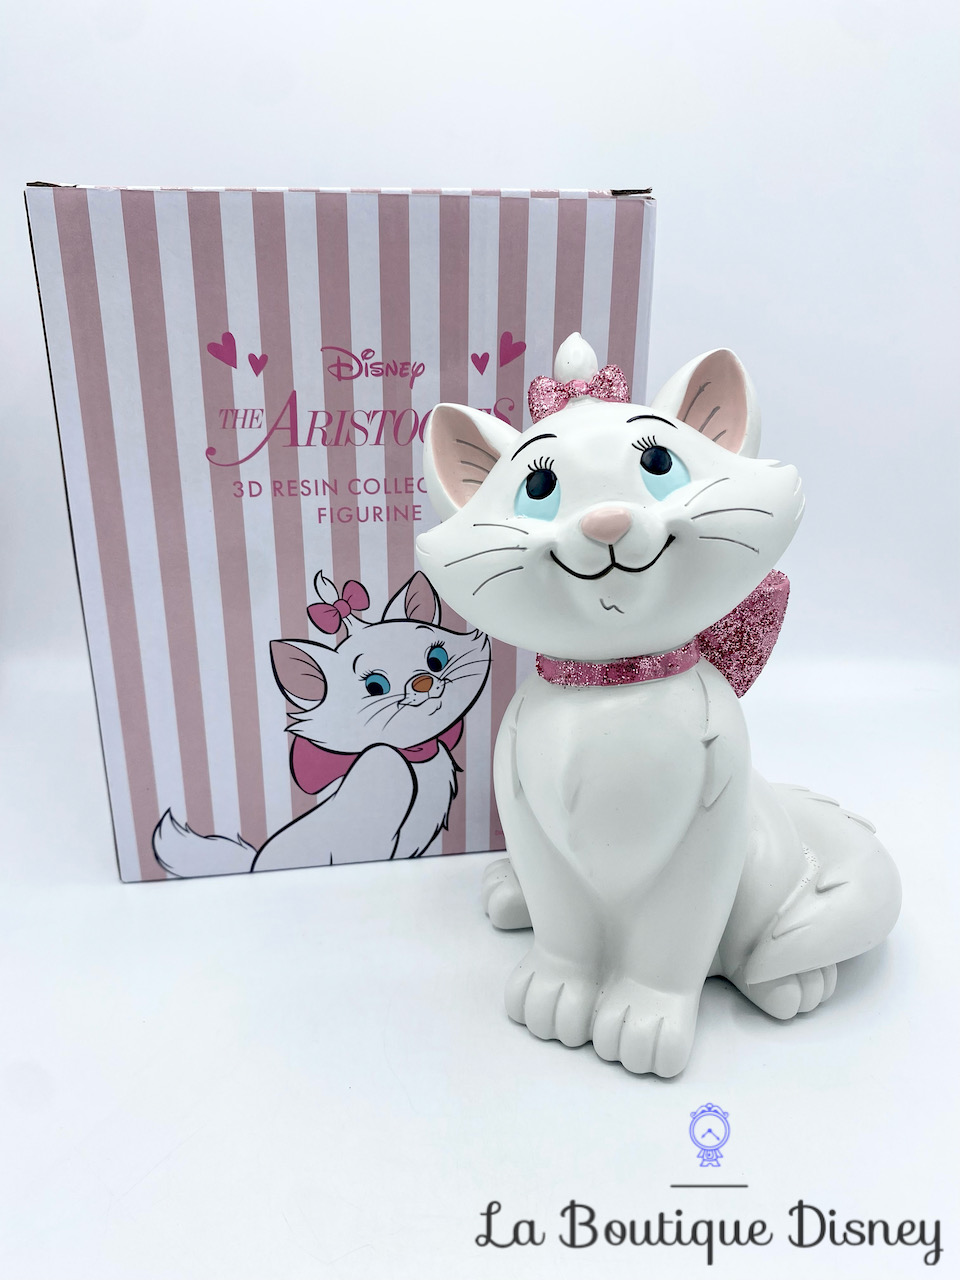 Figurine Marie Les Aristochats Disney Widdop & Co 3D Resin Collectable chat blanc 22 cm